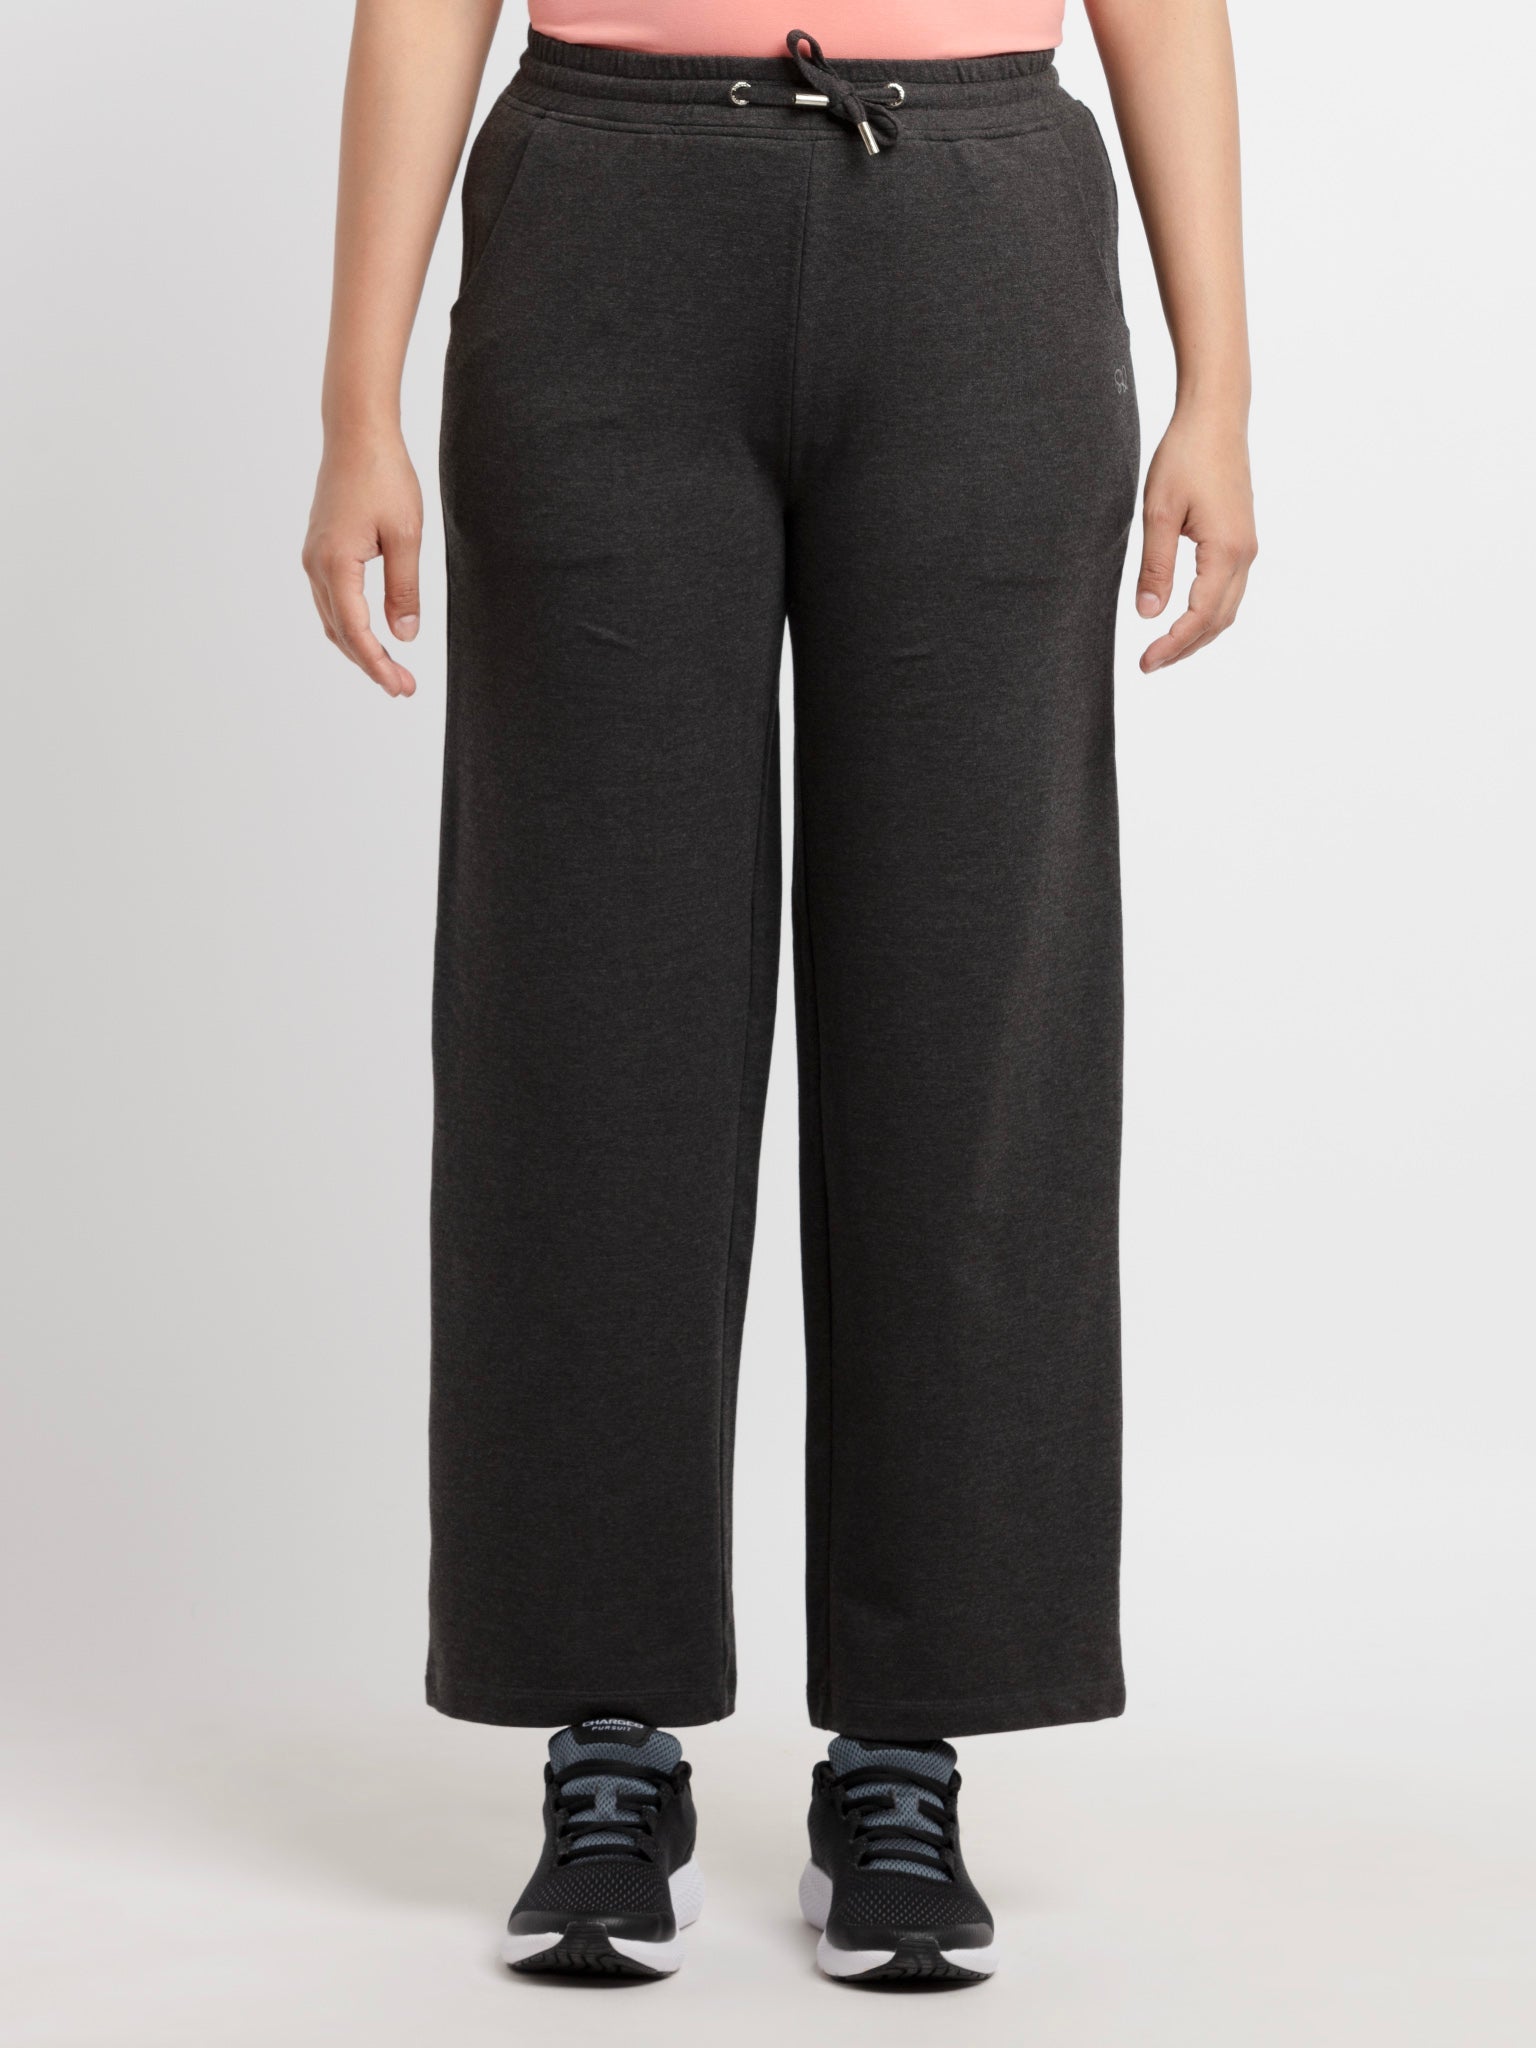 track pants for women